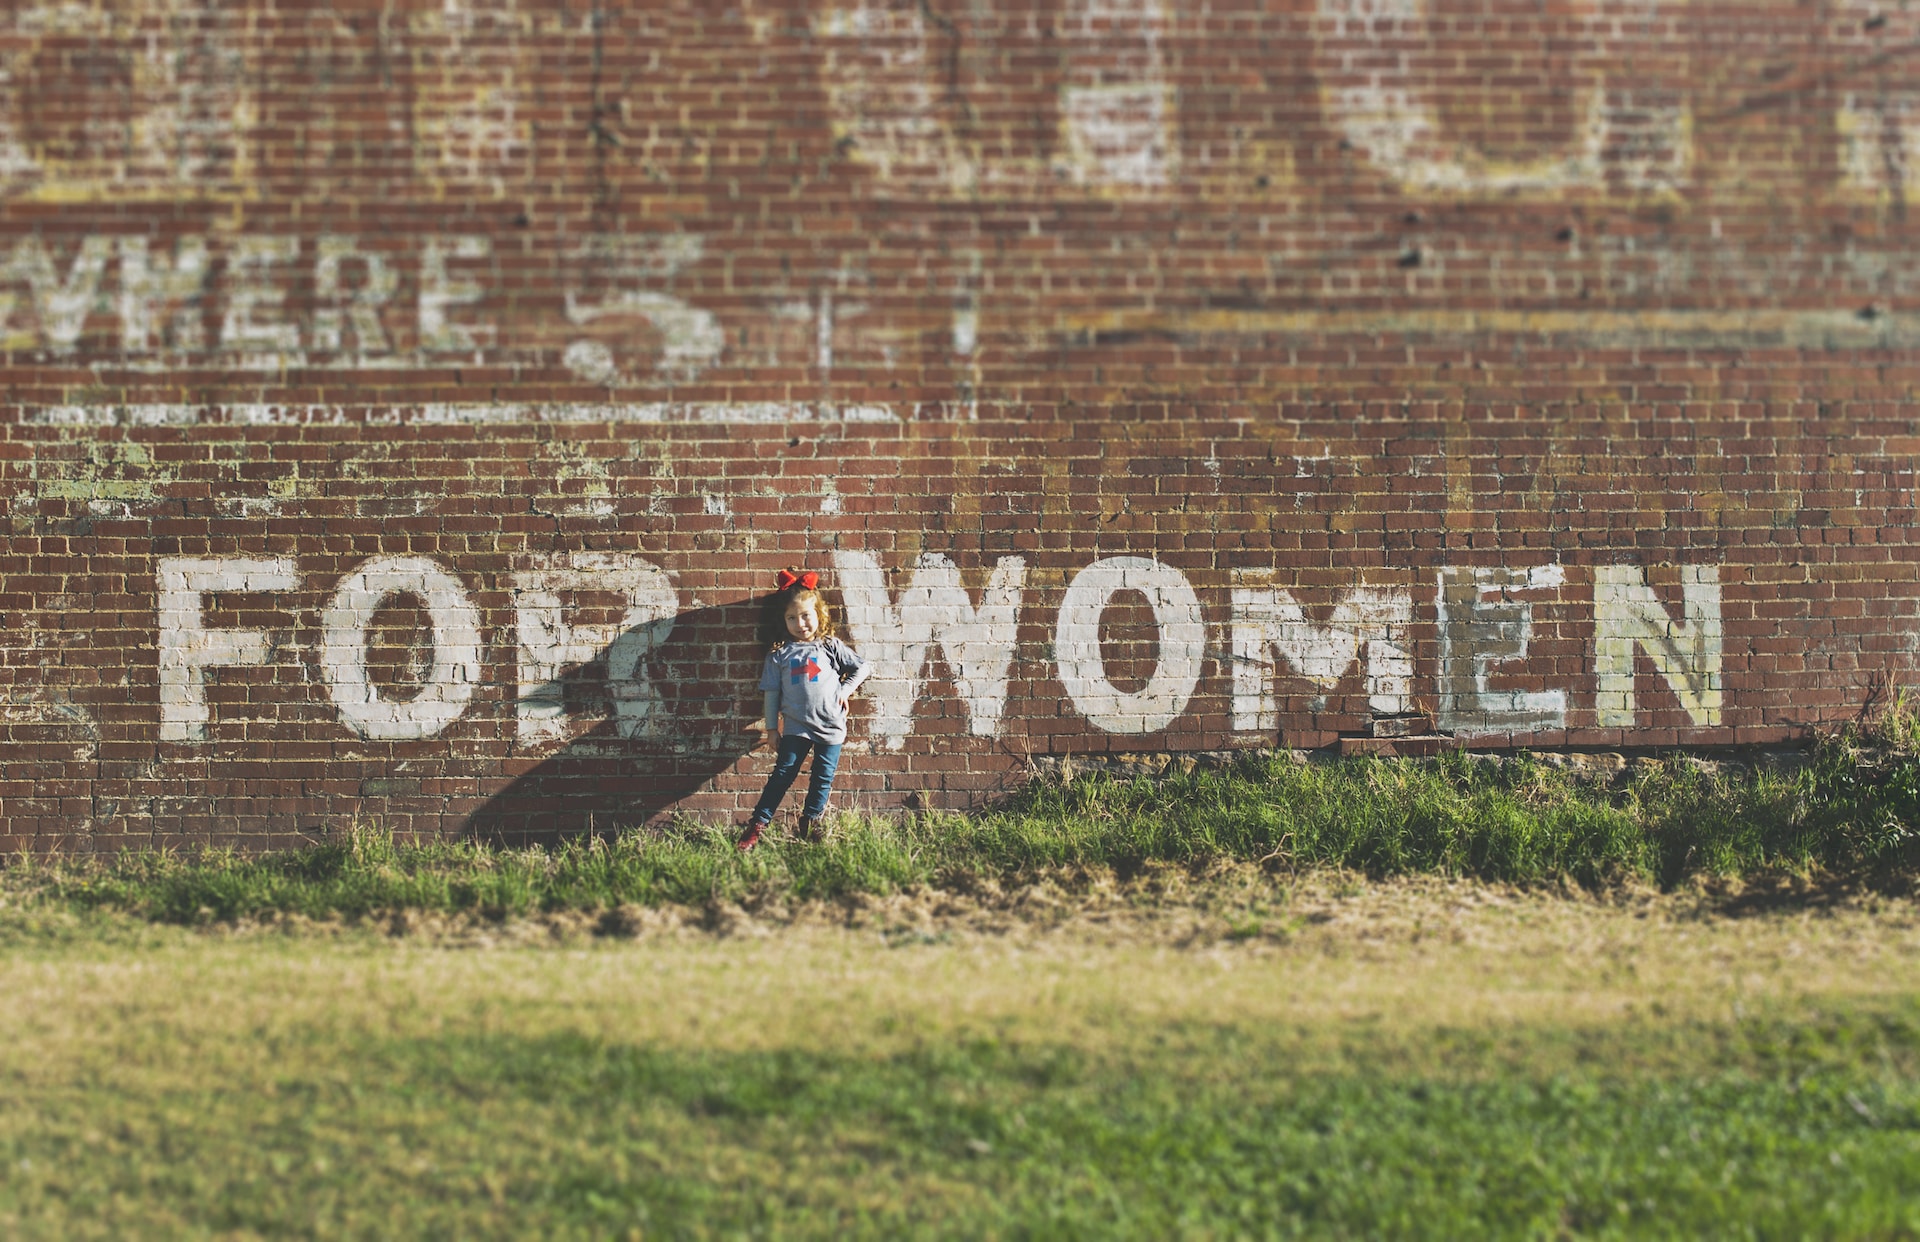 Sassy young girl standing in front of FOR WOMEN painted on brick wall